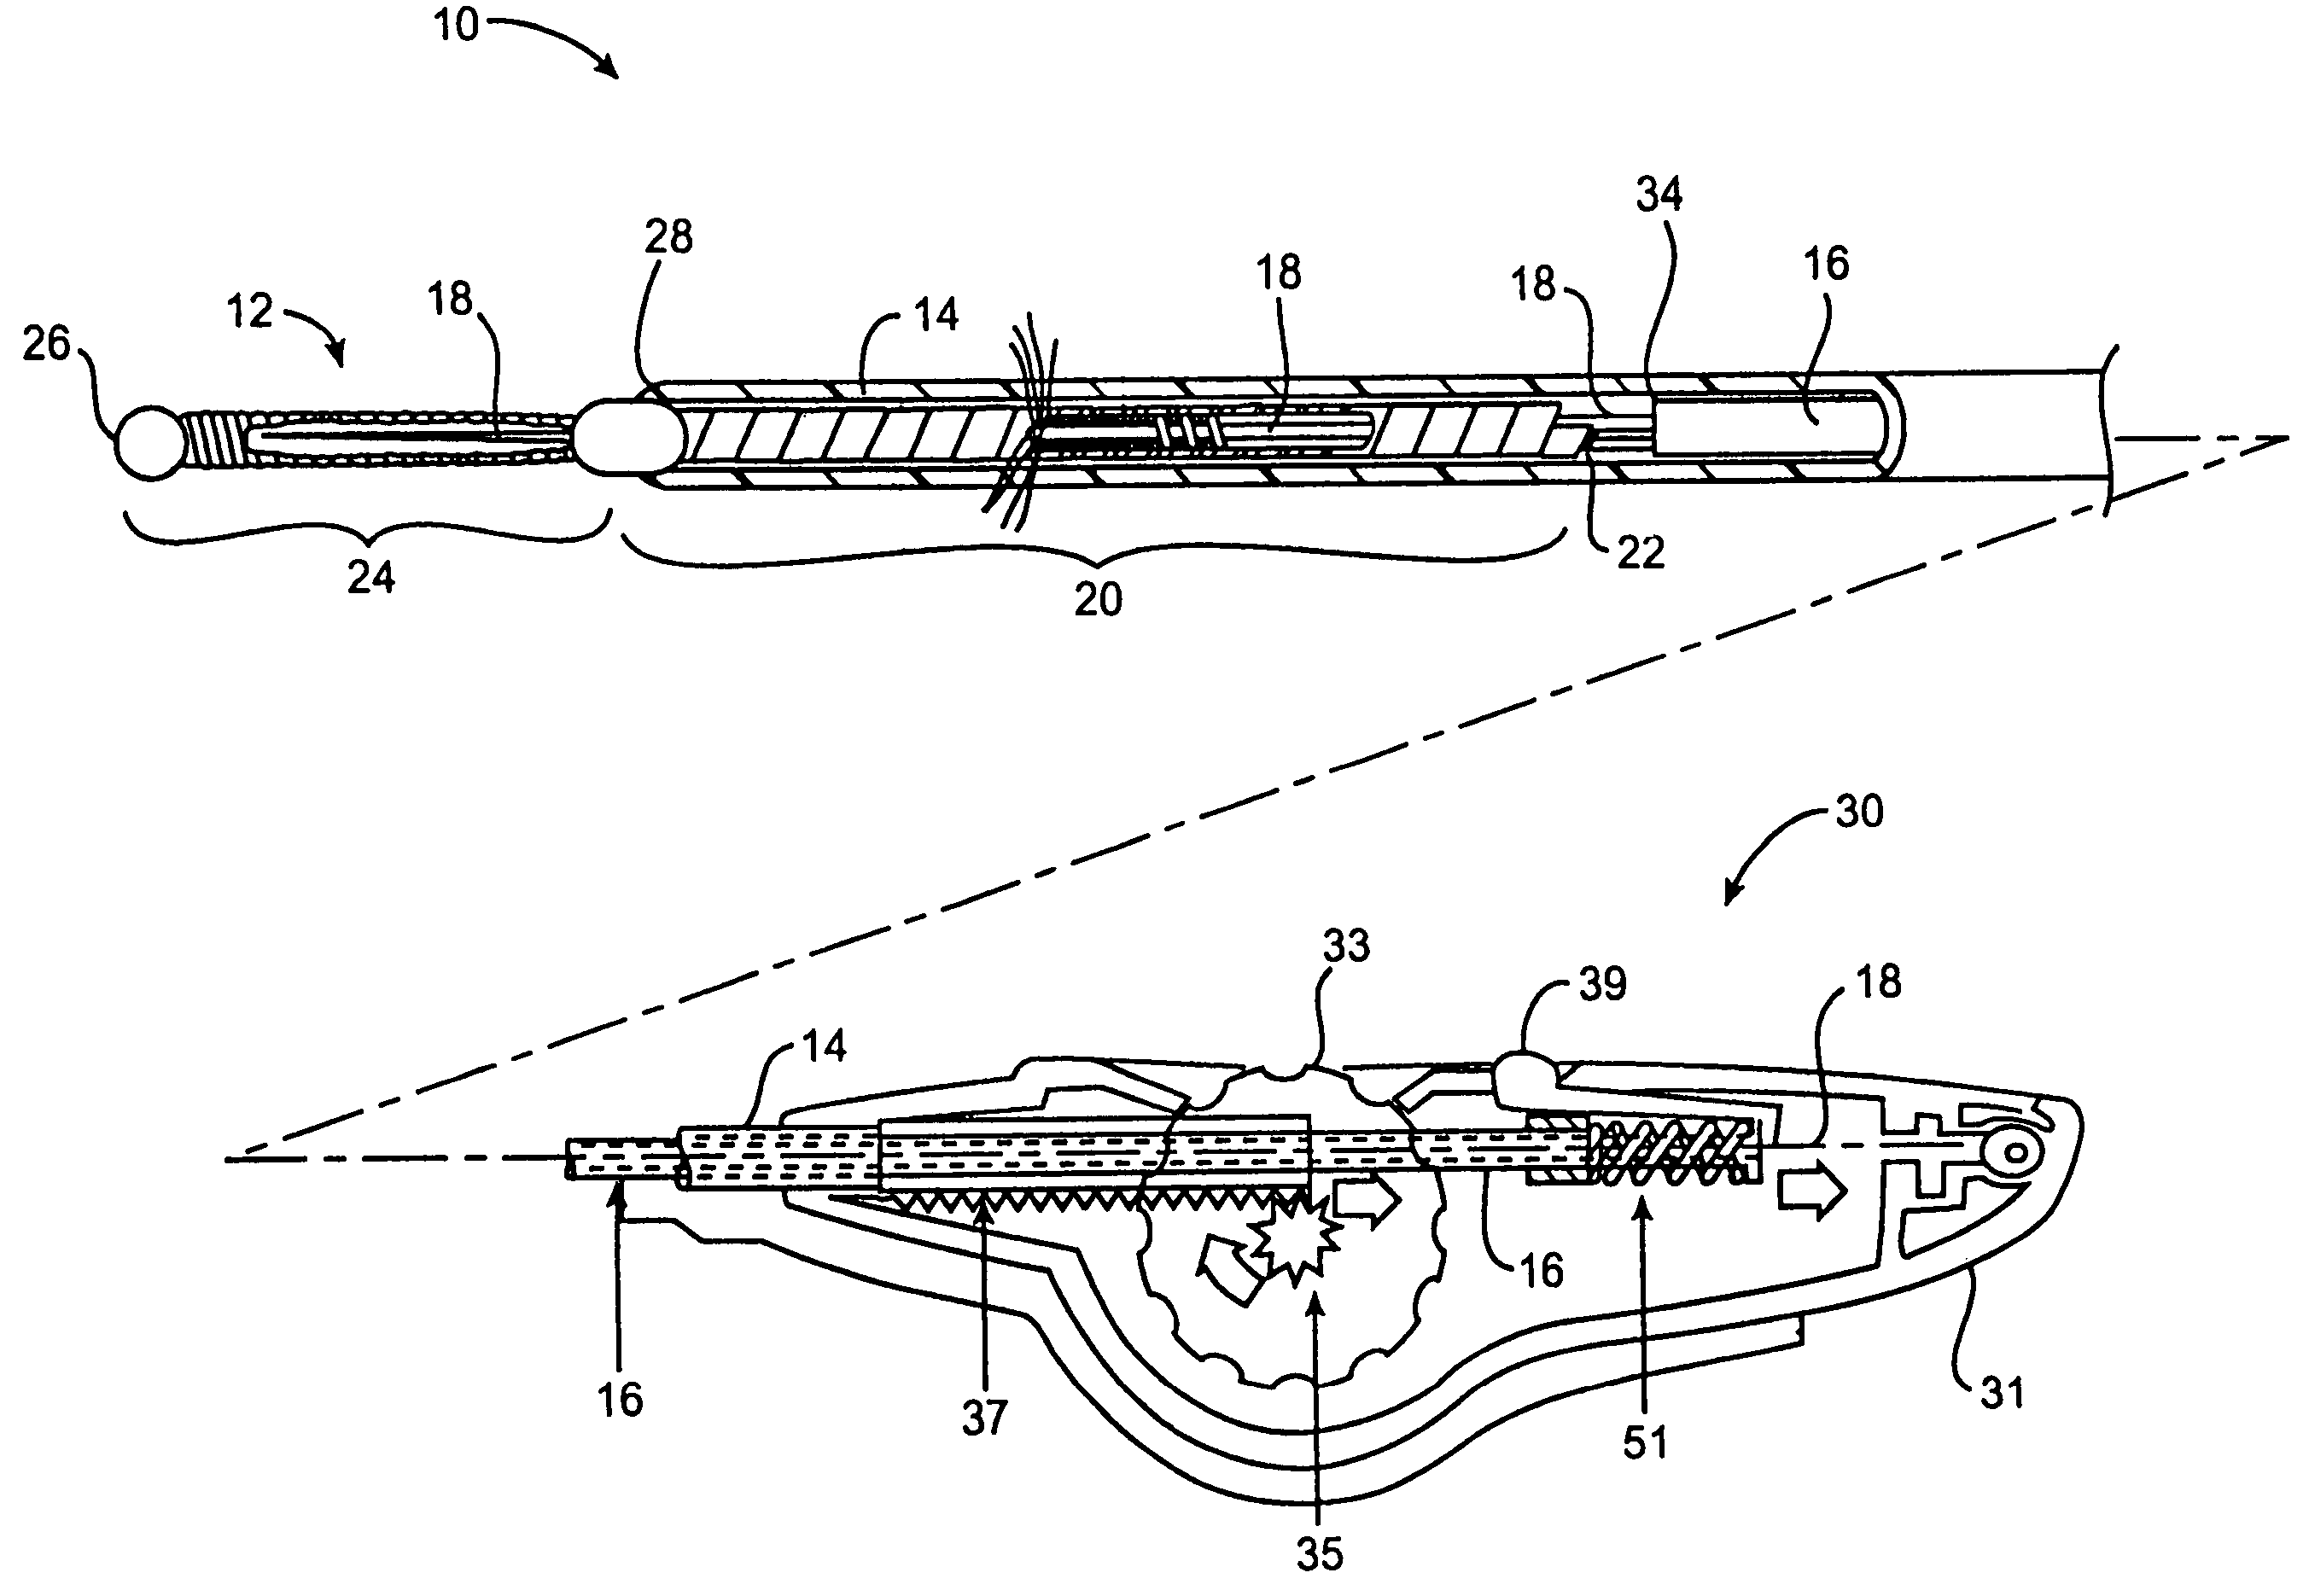 Deployment actuation system for intrafallopian contraception